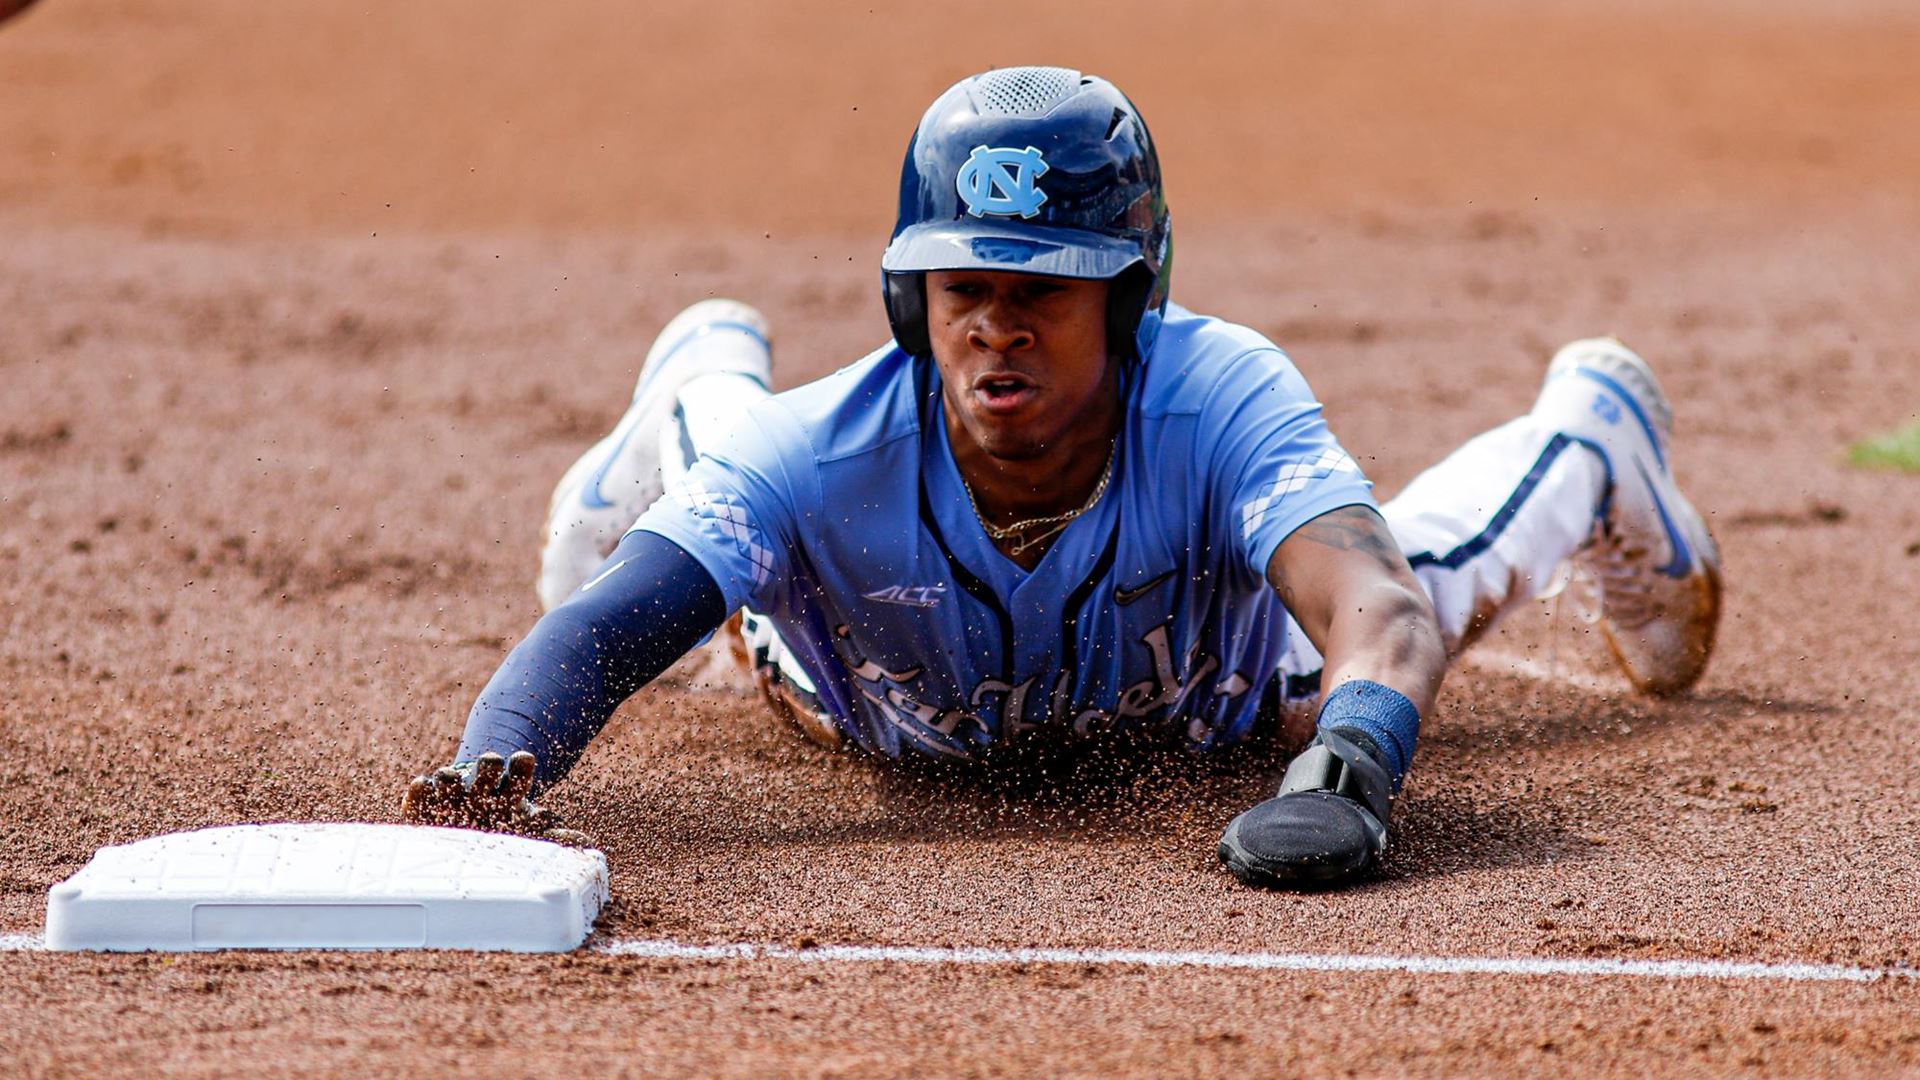 Justice Thompson's Ninth-Inning RBI Lifts UNC Baseball in Opener